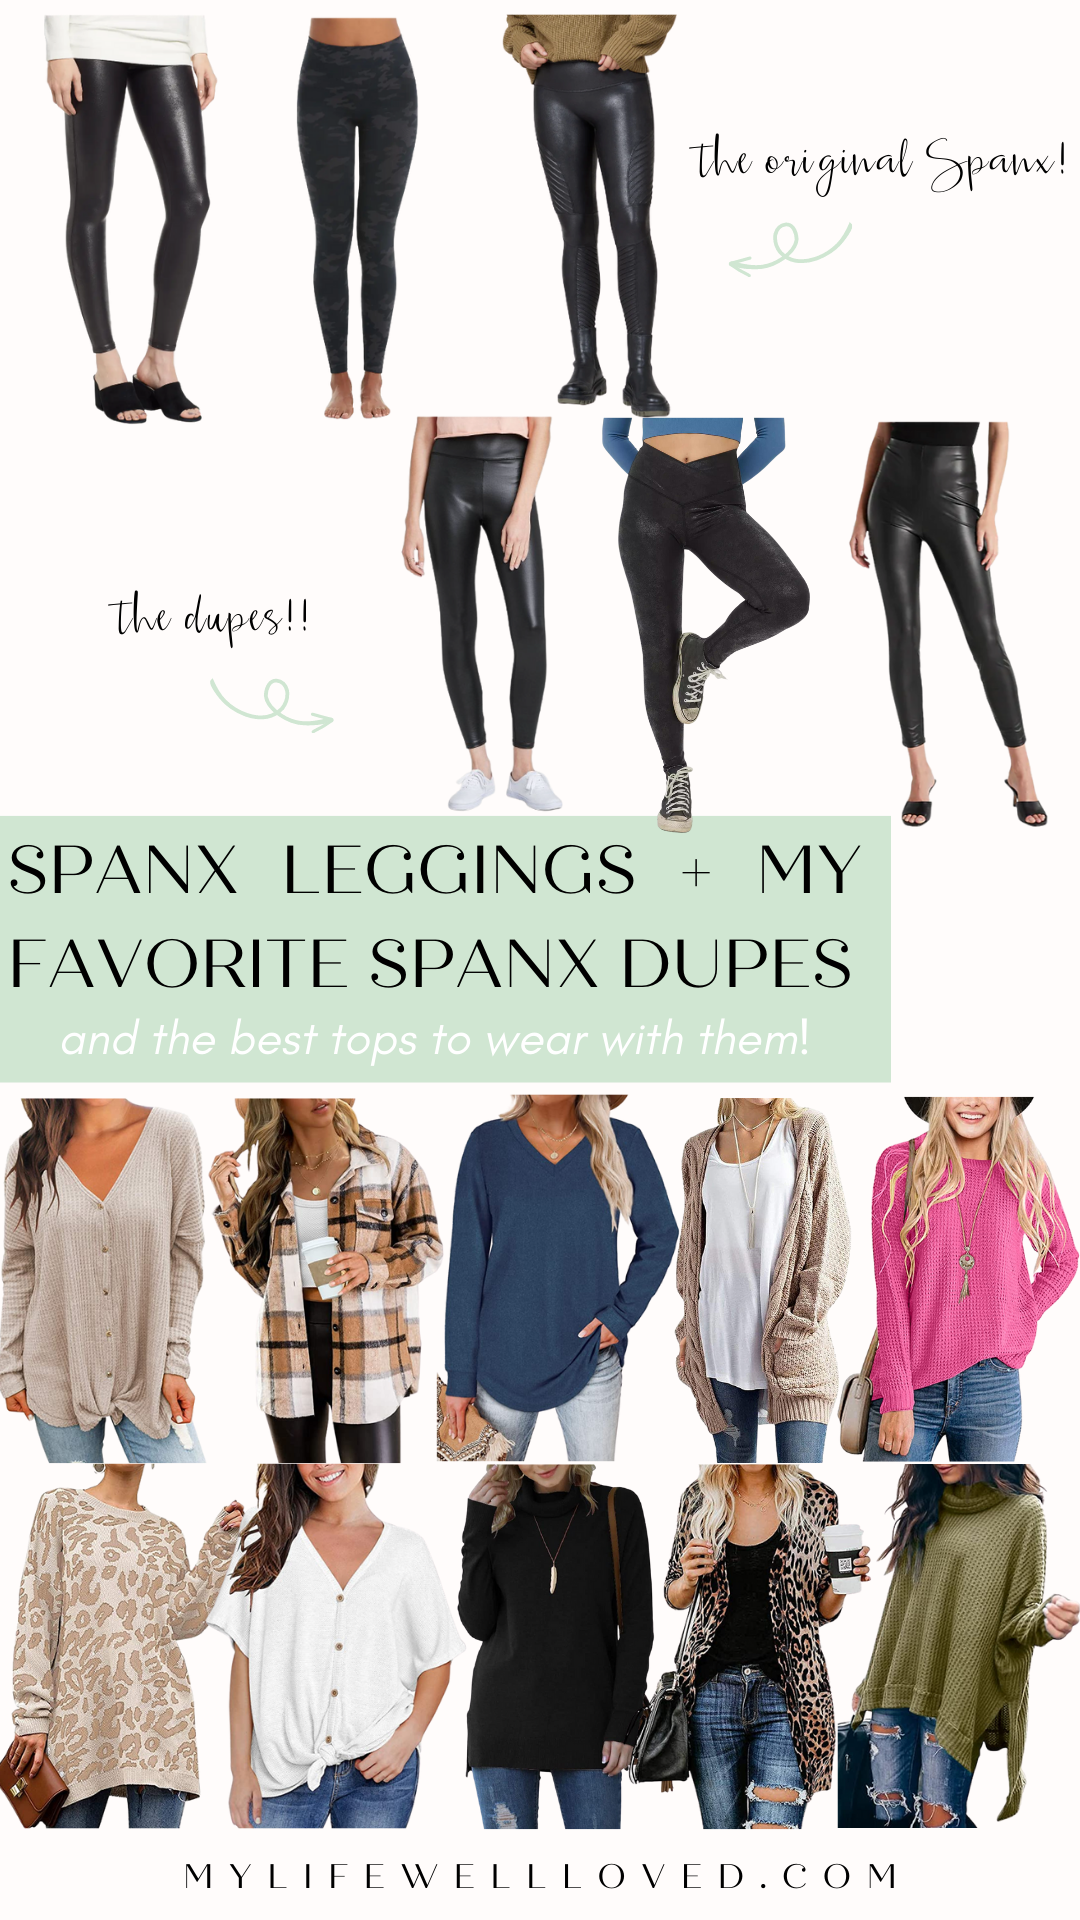 Best Tops To Wear With Spanx Leggings Women's